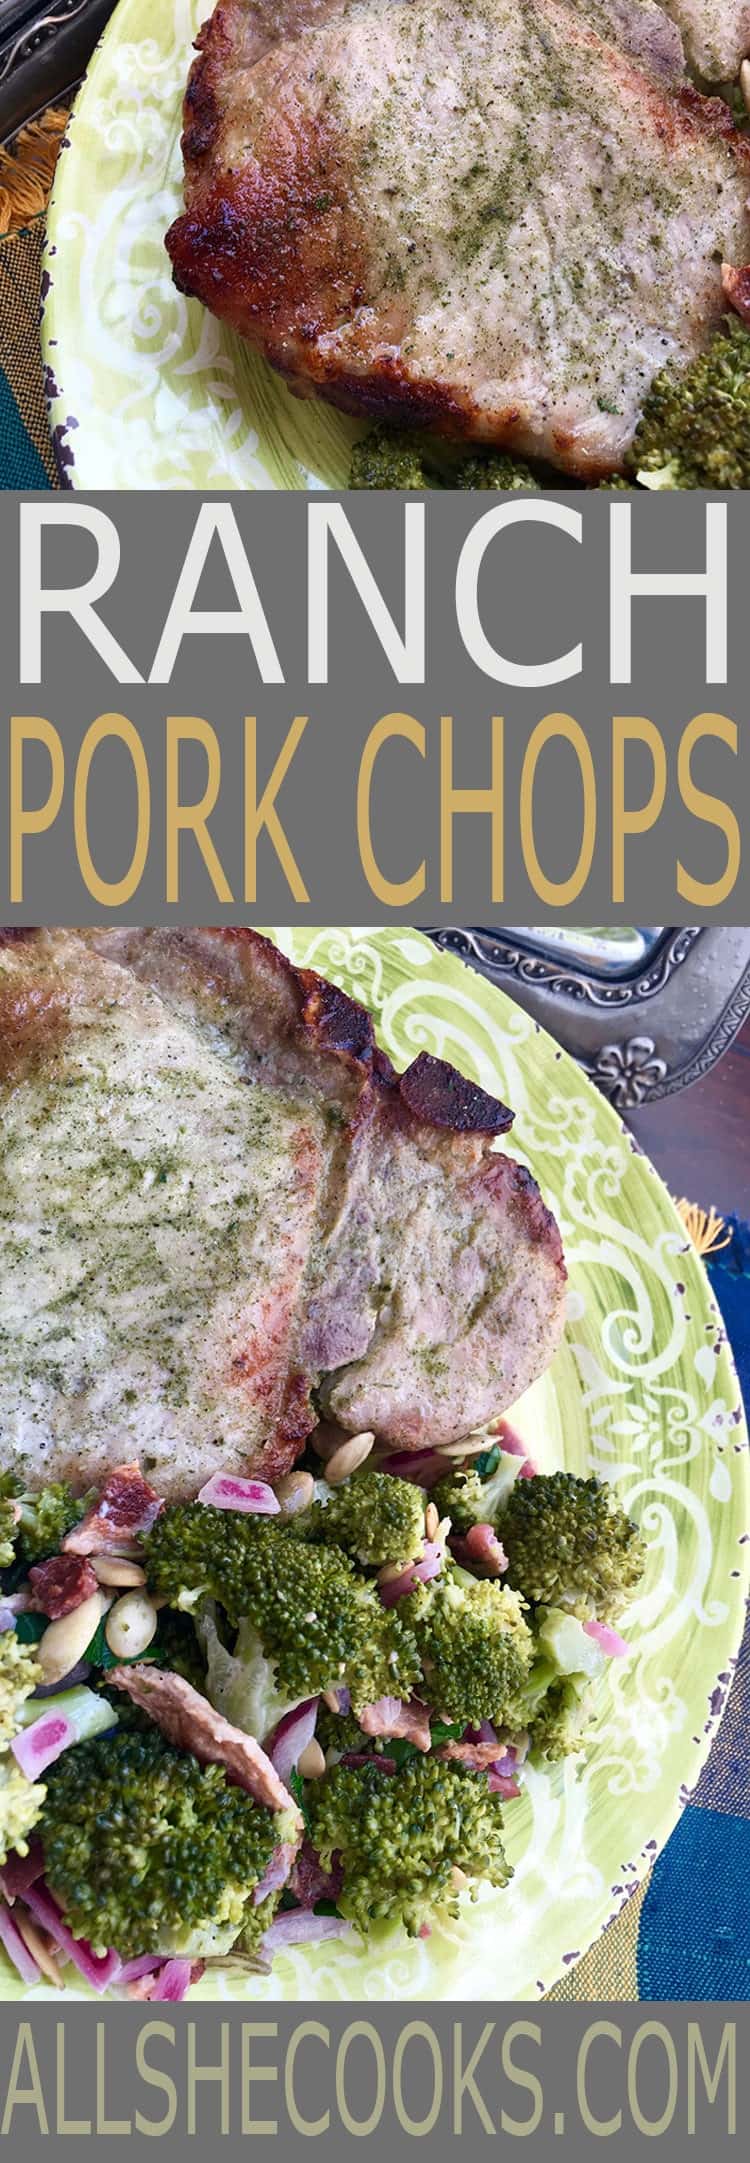 Ranch Pork Chops are rubbed with a homemade ranch seasoning that makes the flavor of this pork chop so flavorful.